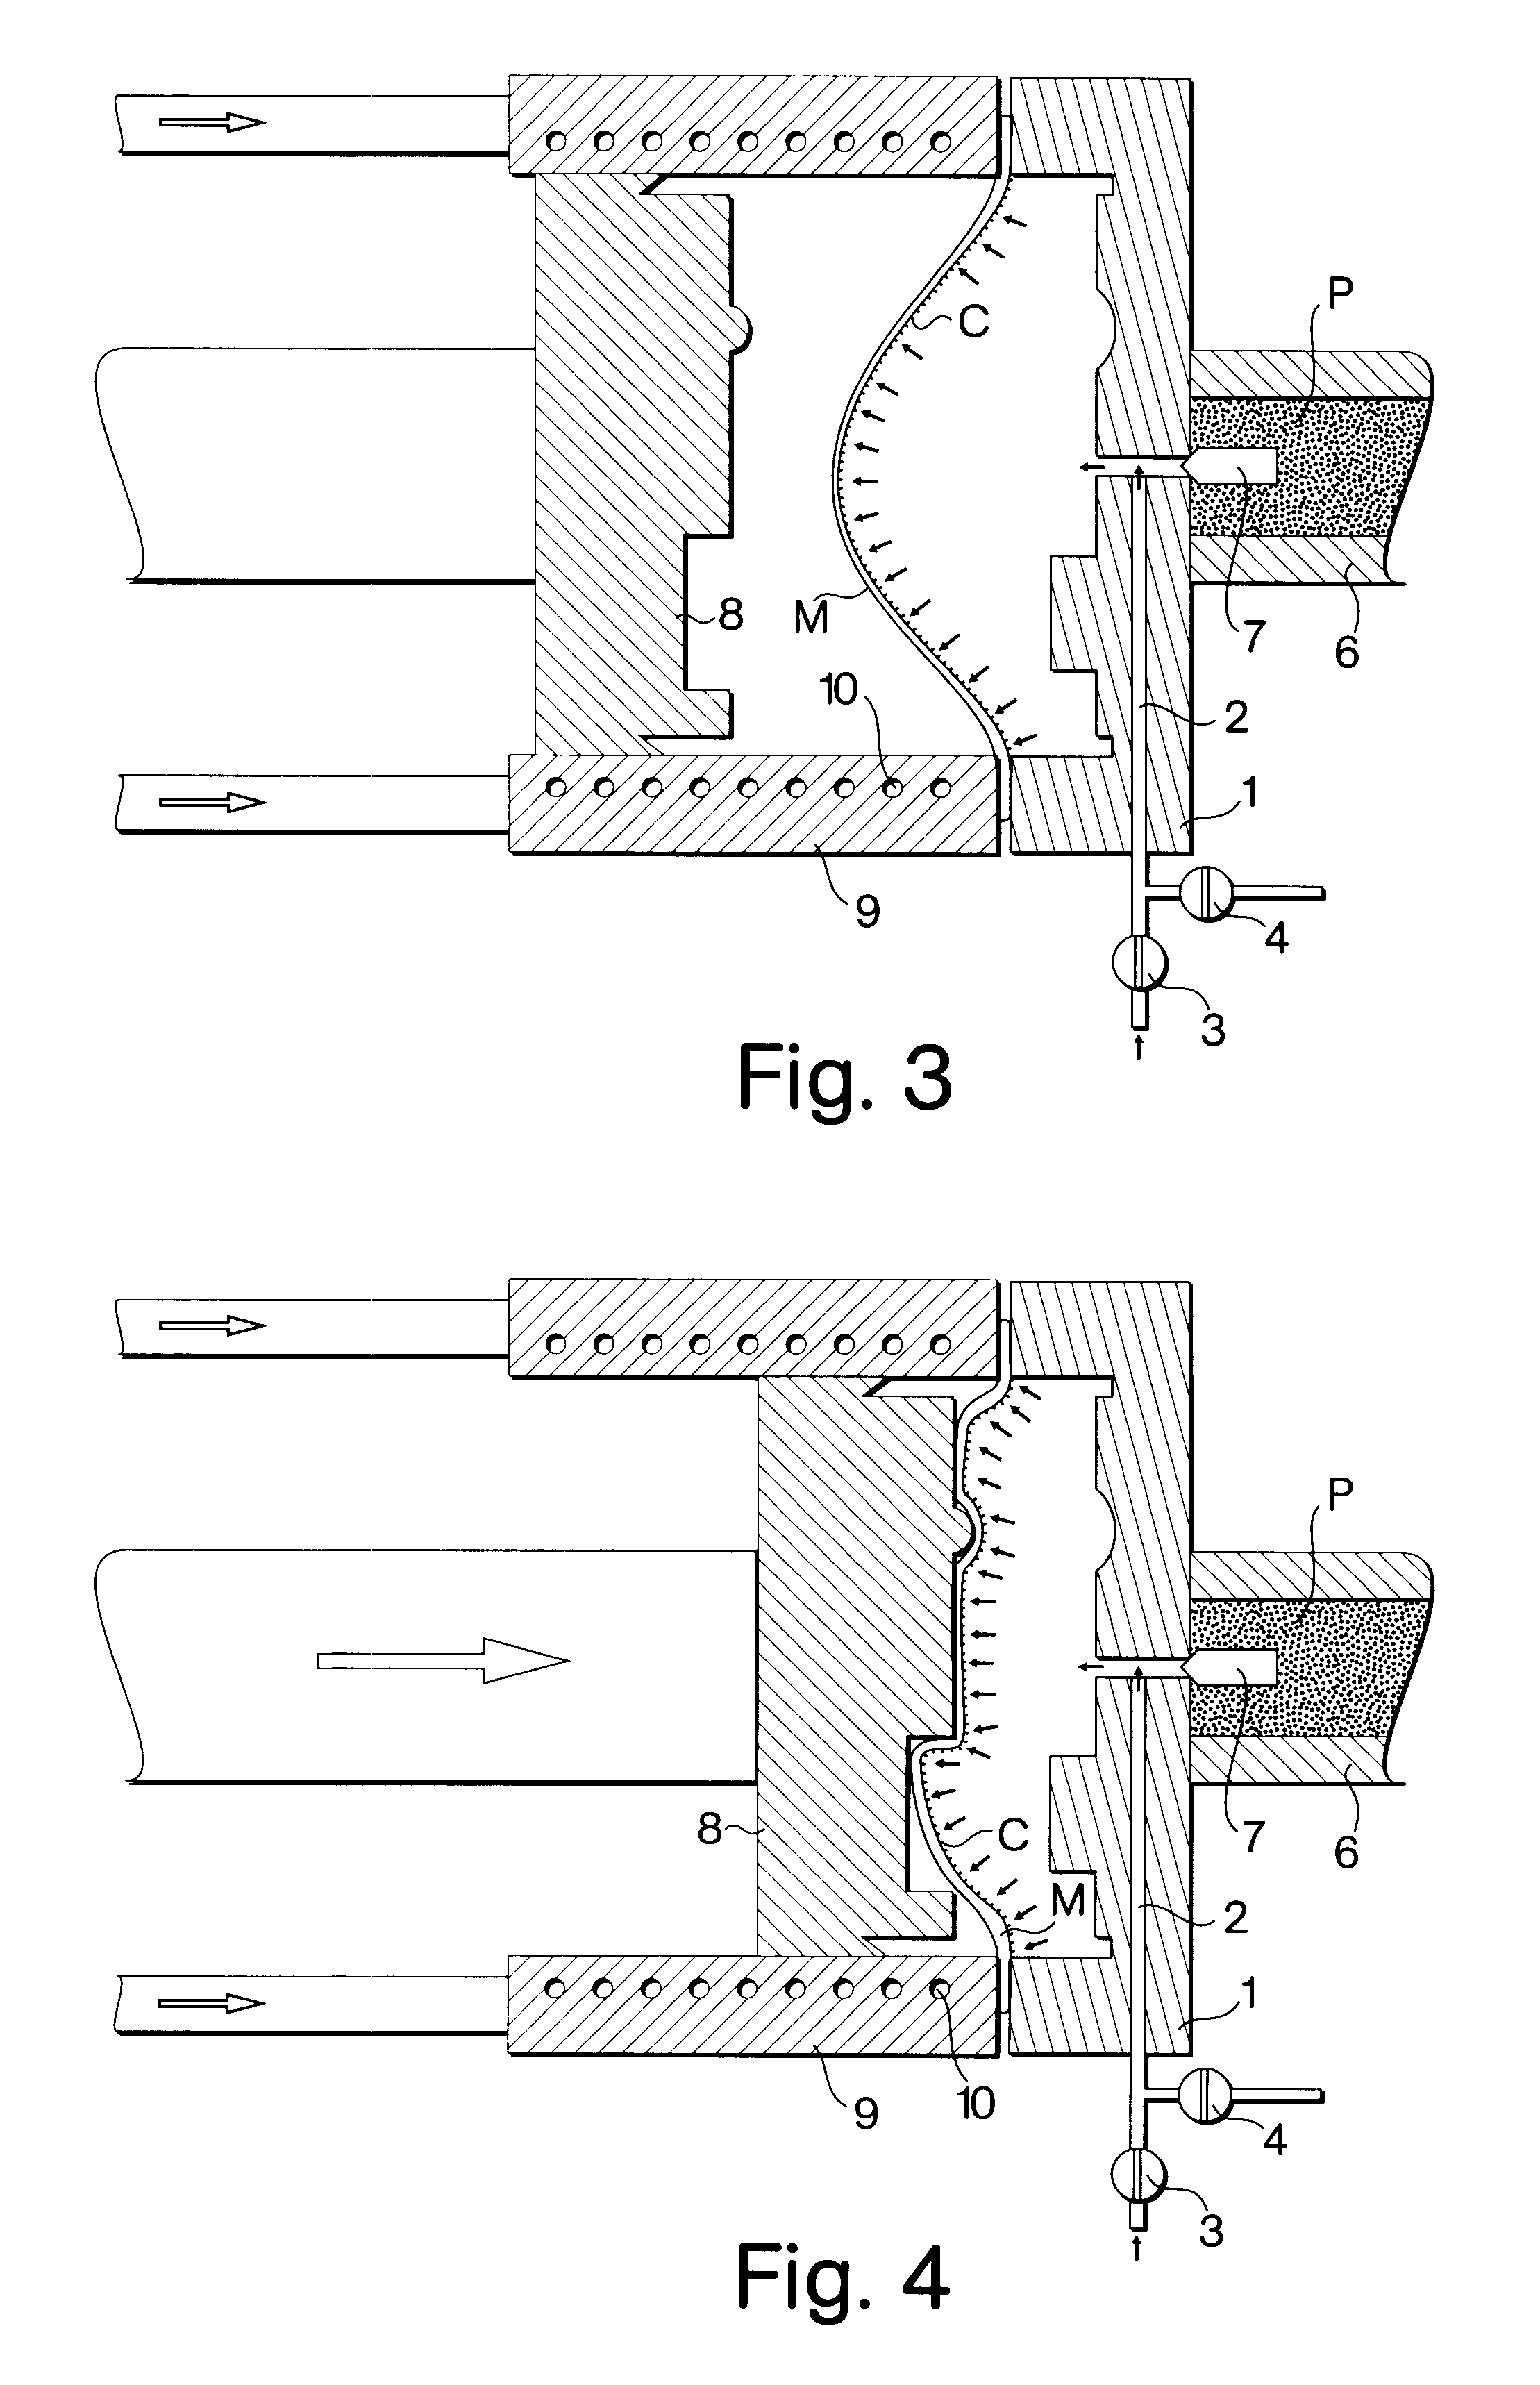 Process for manufacturing an electromagnetic interference shielding metallic foil cladded plastic product